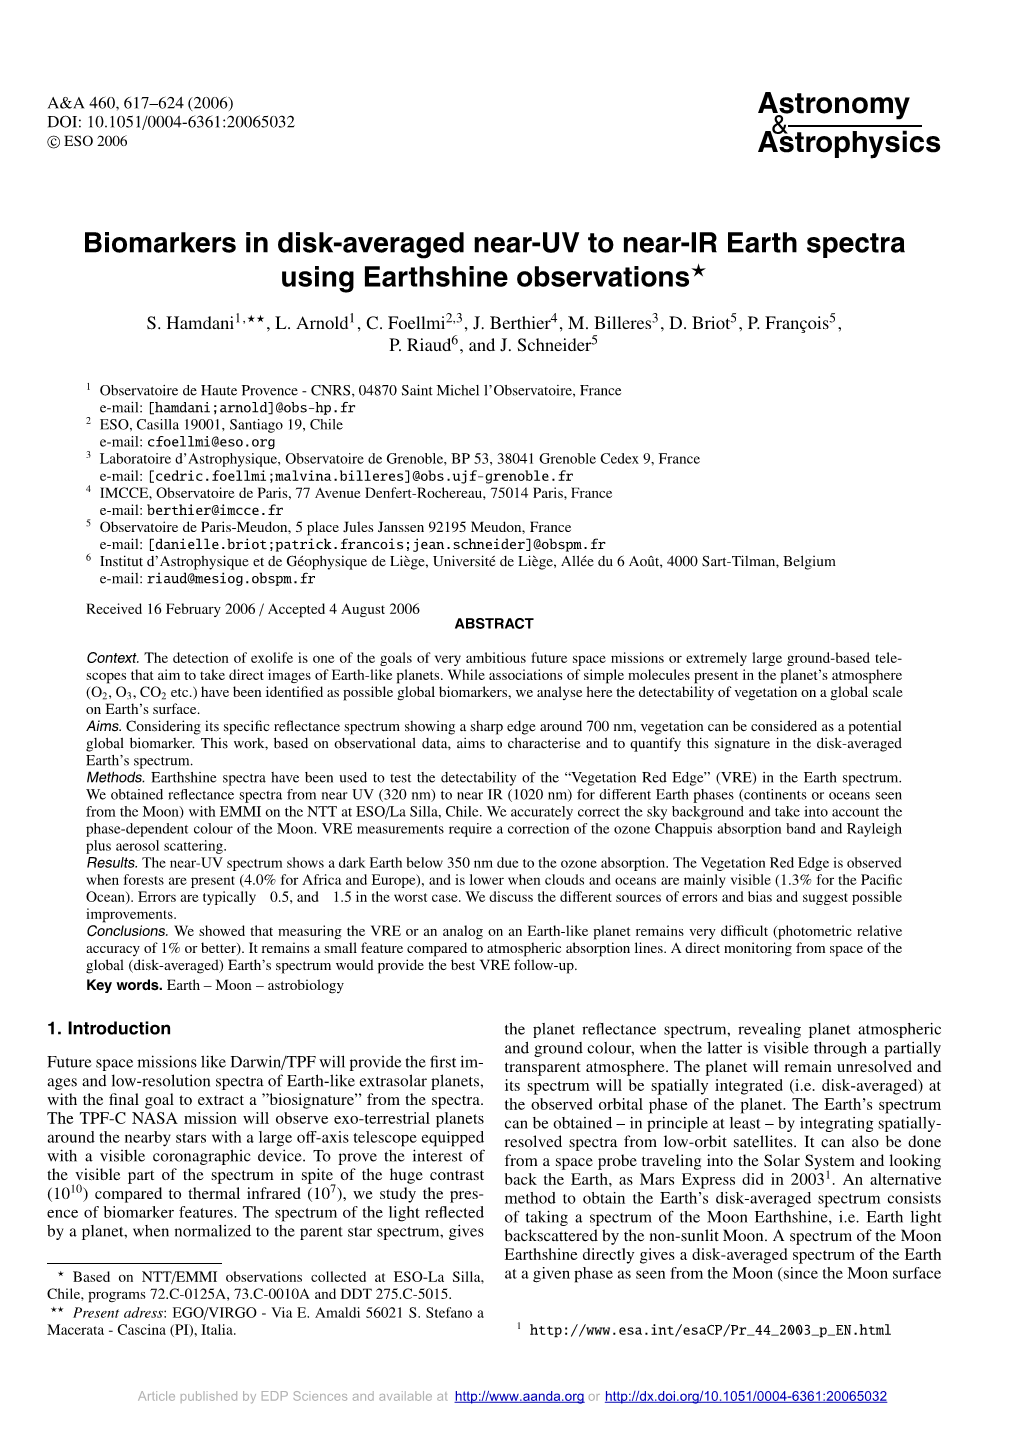 Biomarkers in Disk-Averaged Near-UV to Near-IR Earth Spectra Using Earthshine Observations